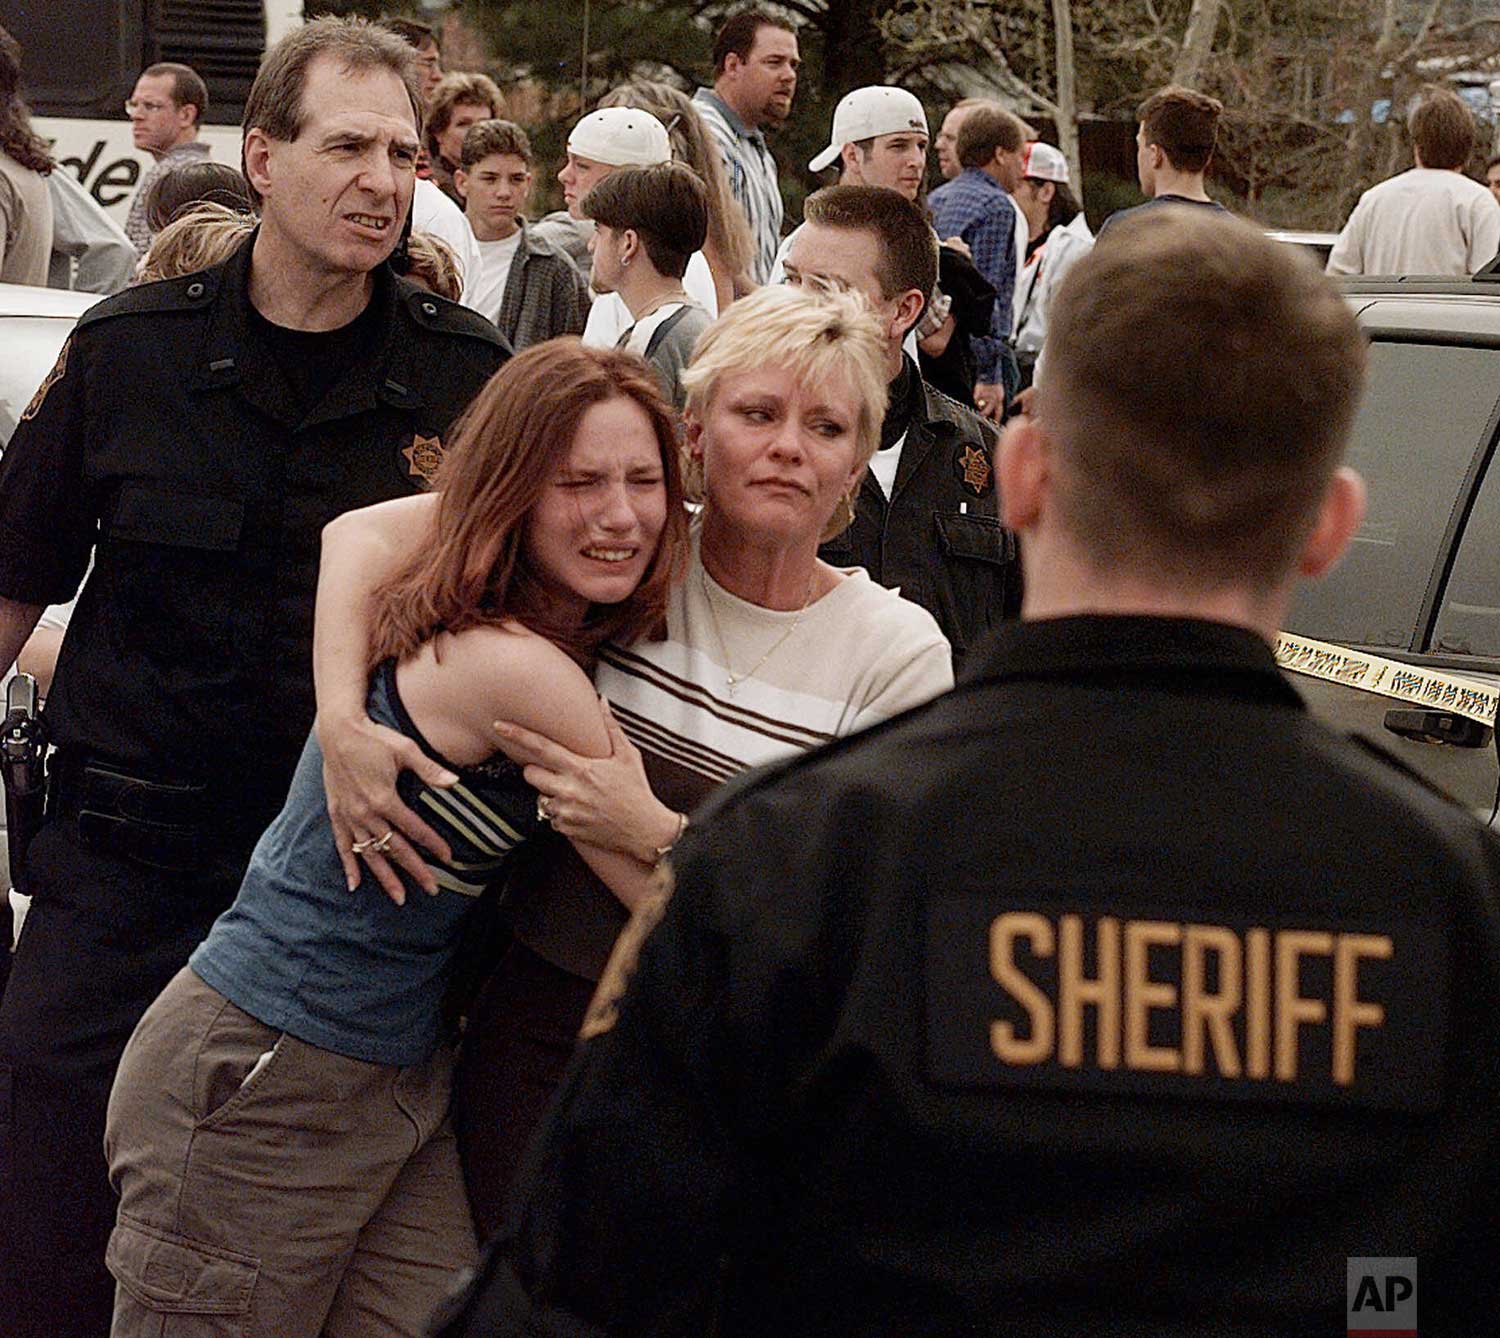  A woman embraces her daughter after they were reunited following a shooting at Columbine High School in Littleton, Colo., on Tuesday, April, 20, 1999. (AP Photo/Ed Andrieski) 